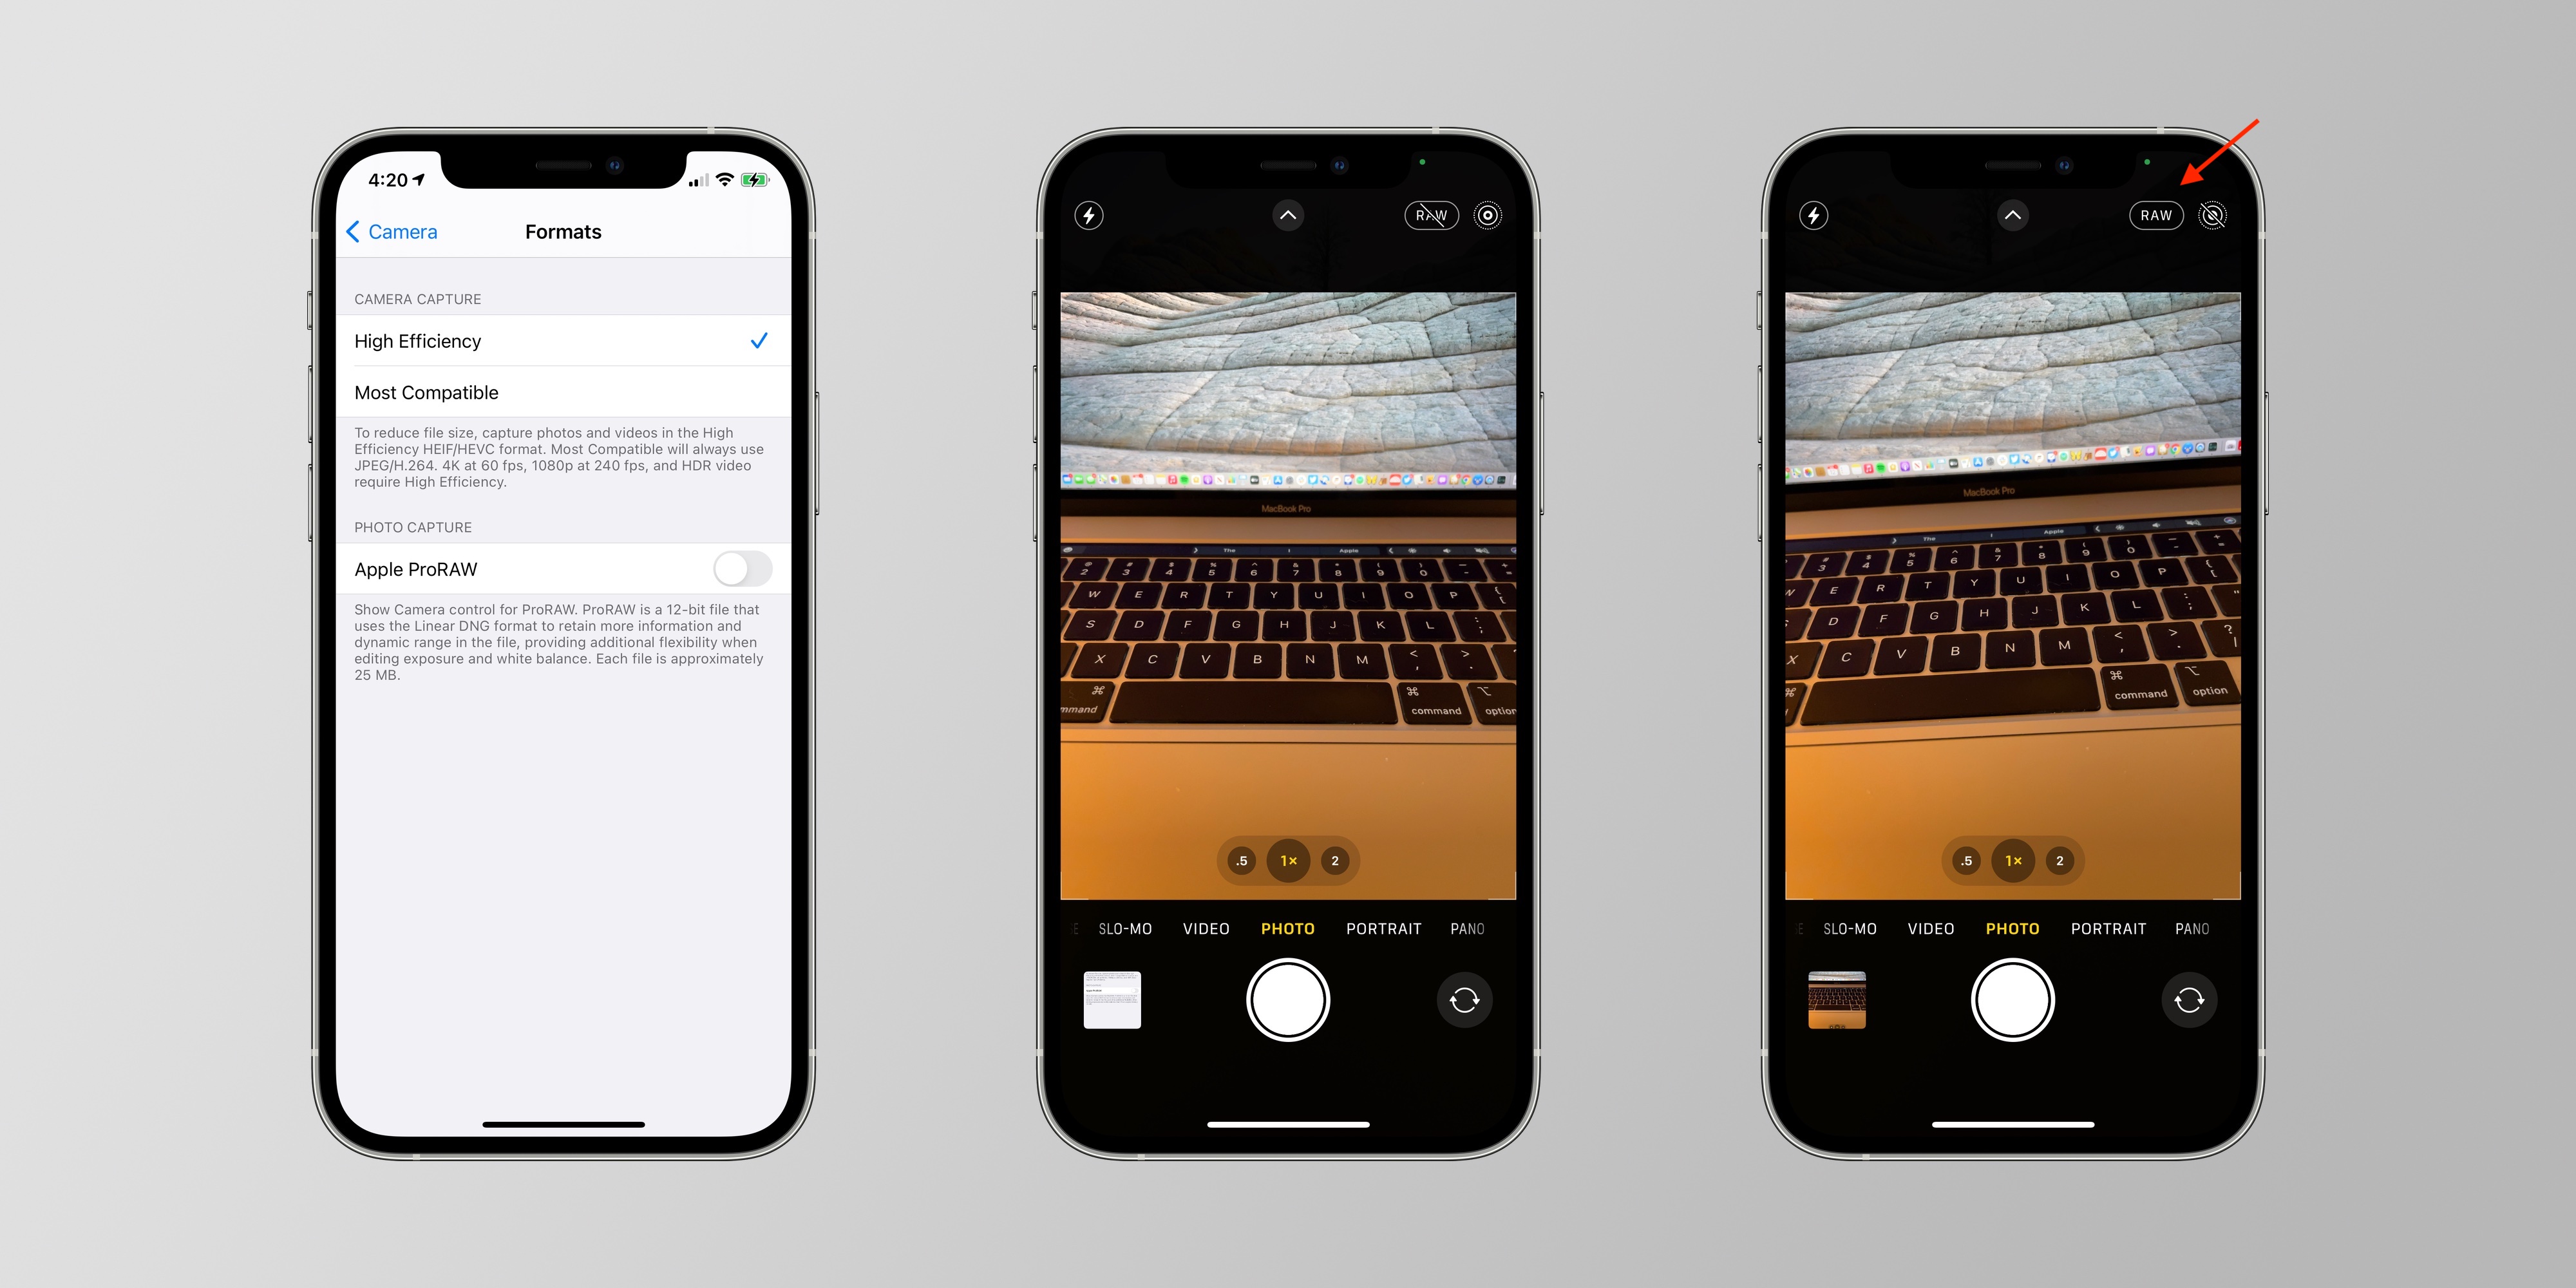 iOS 14.3 adds new ProRAW photo format on iPhone 12 Pro and iPhone 12